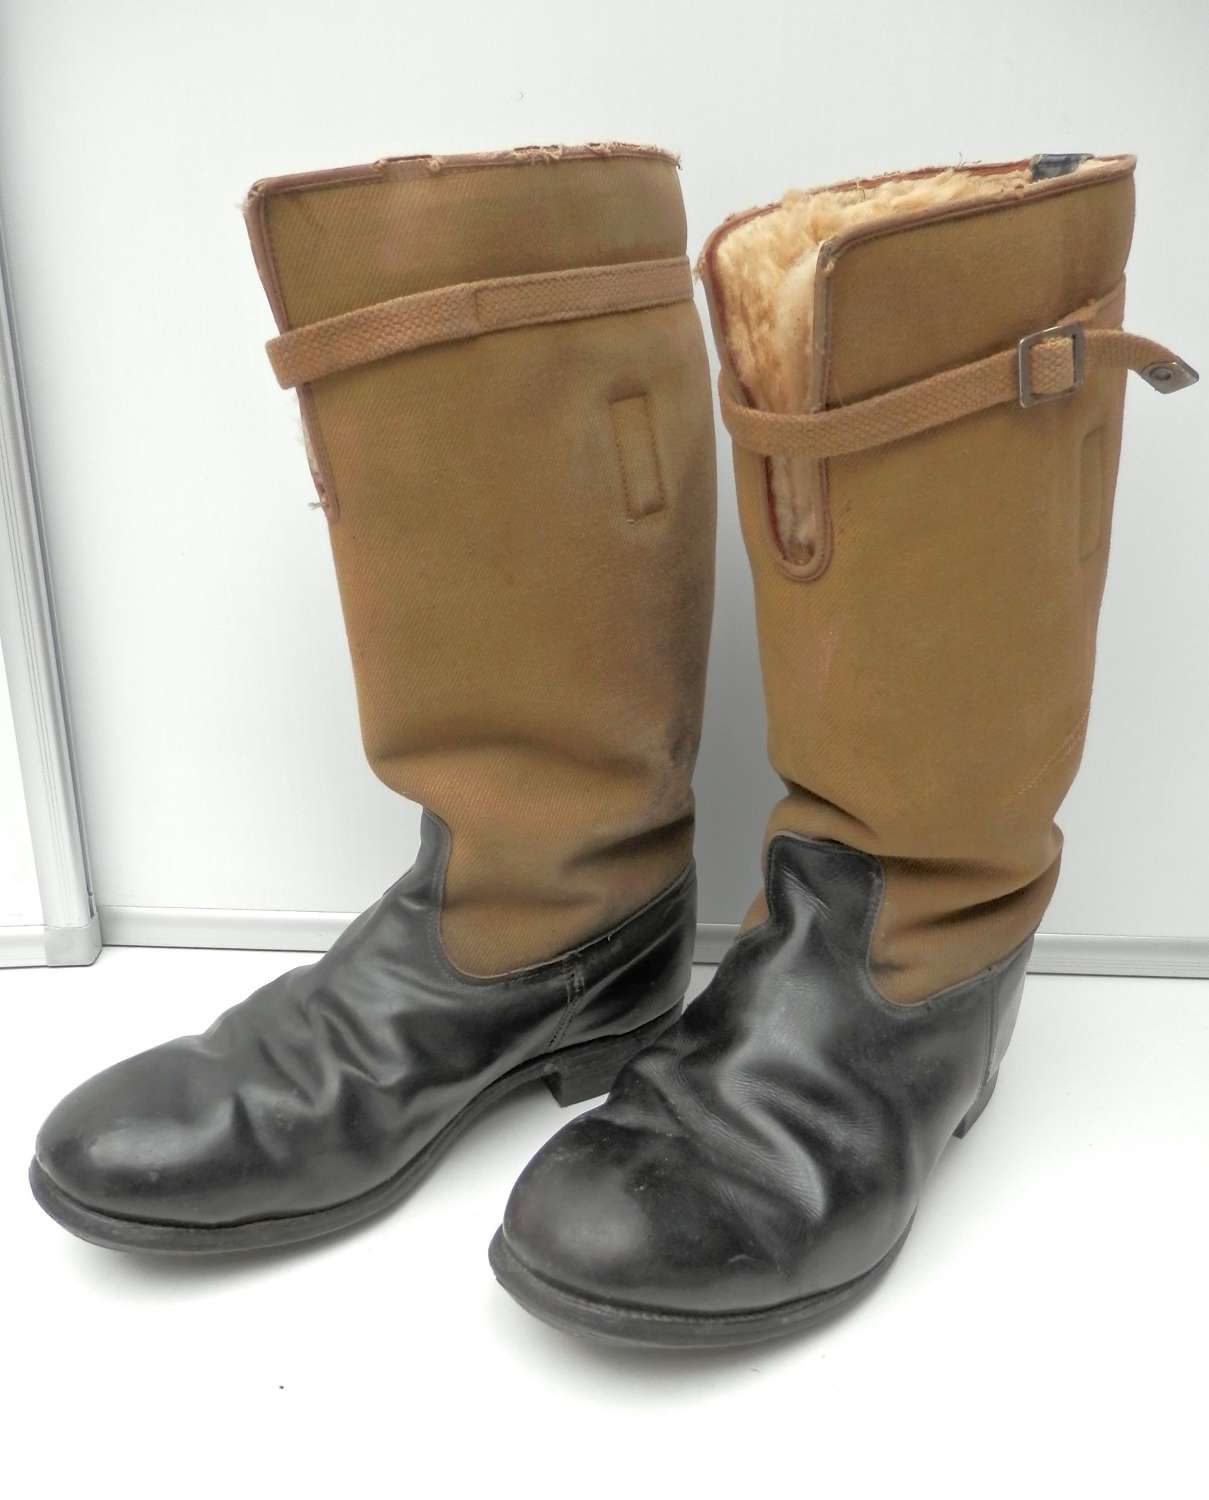 RAF 1939 pattern flying boots